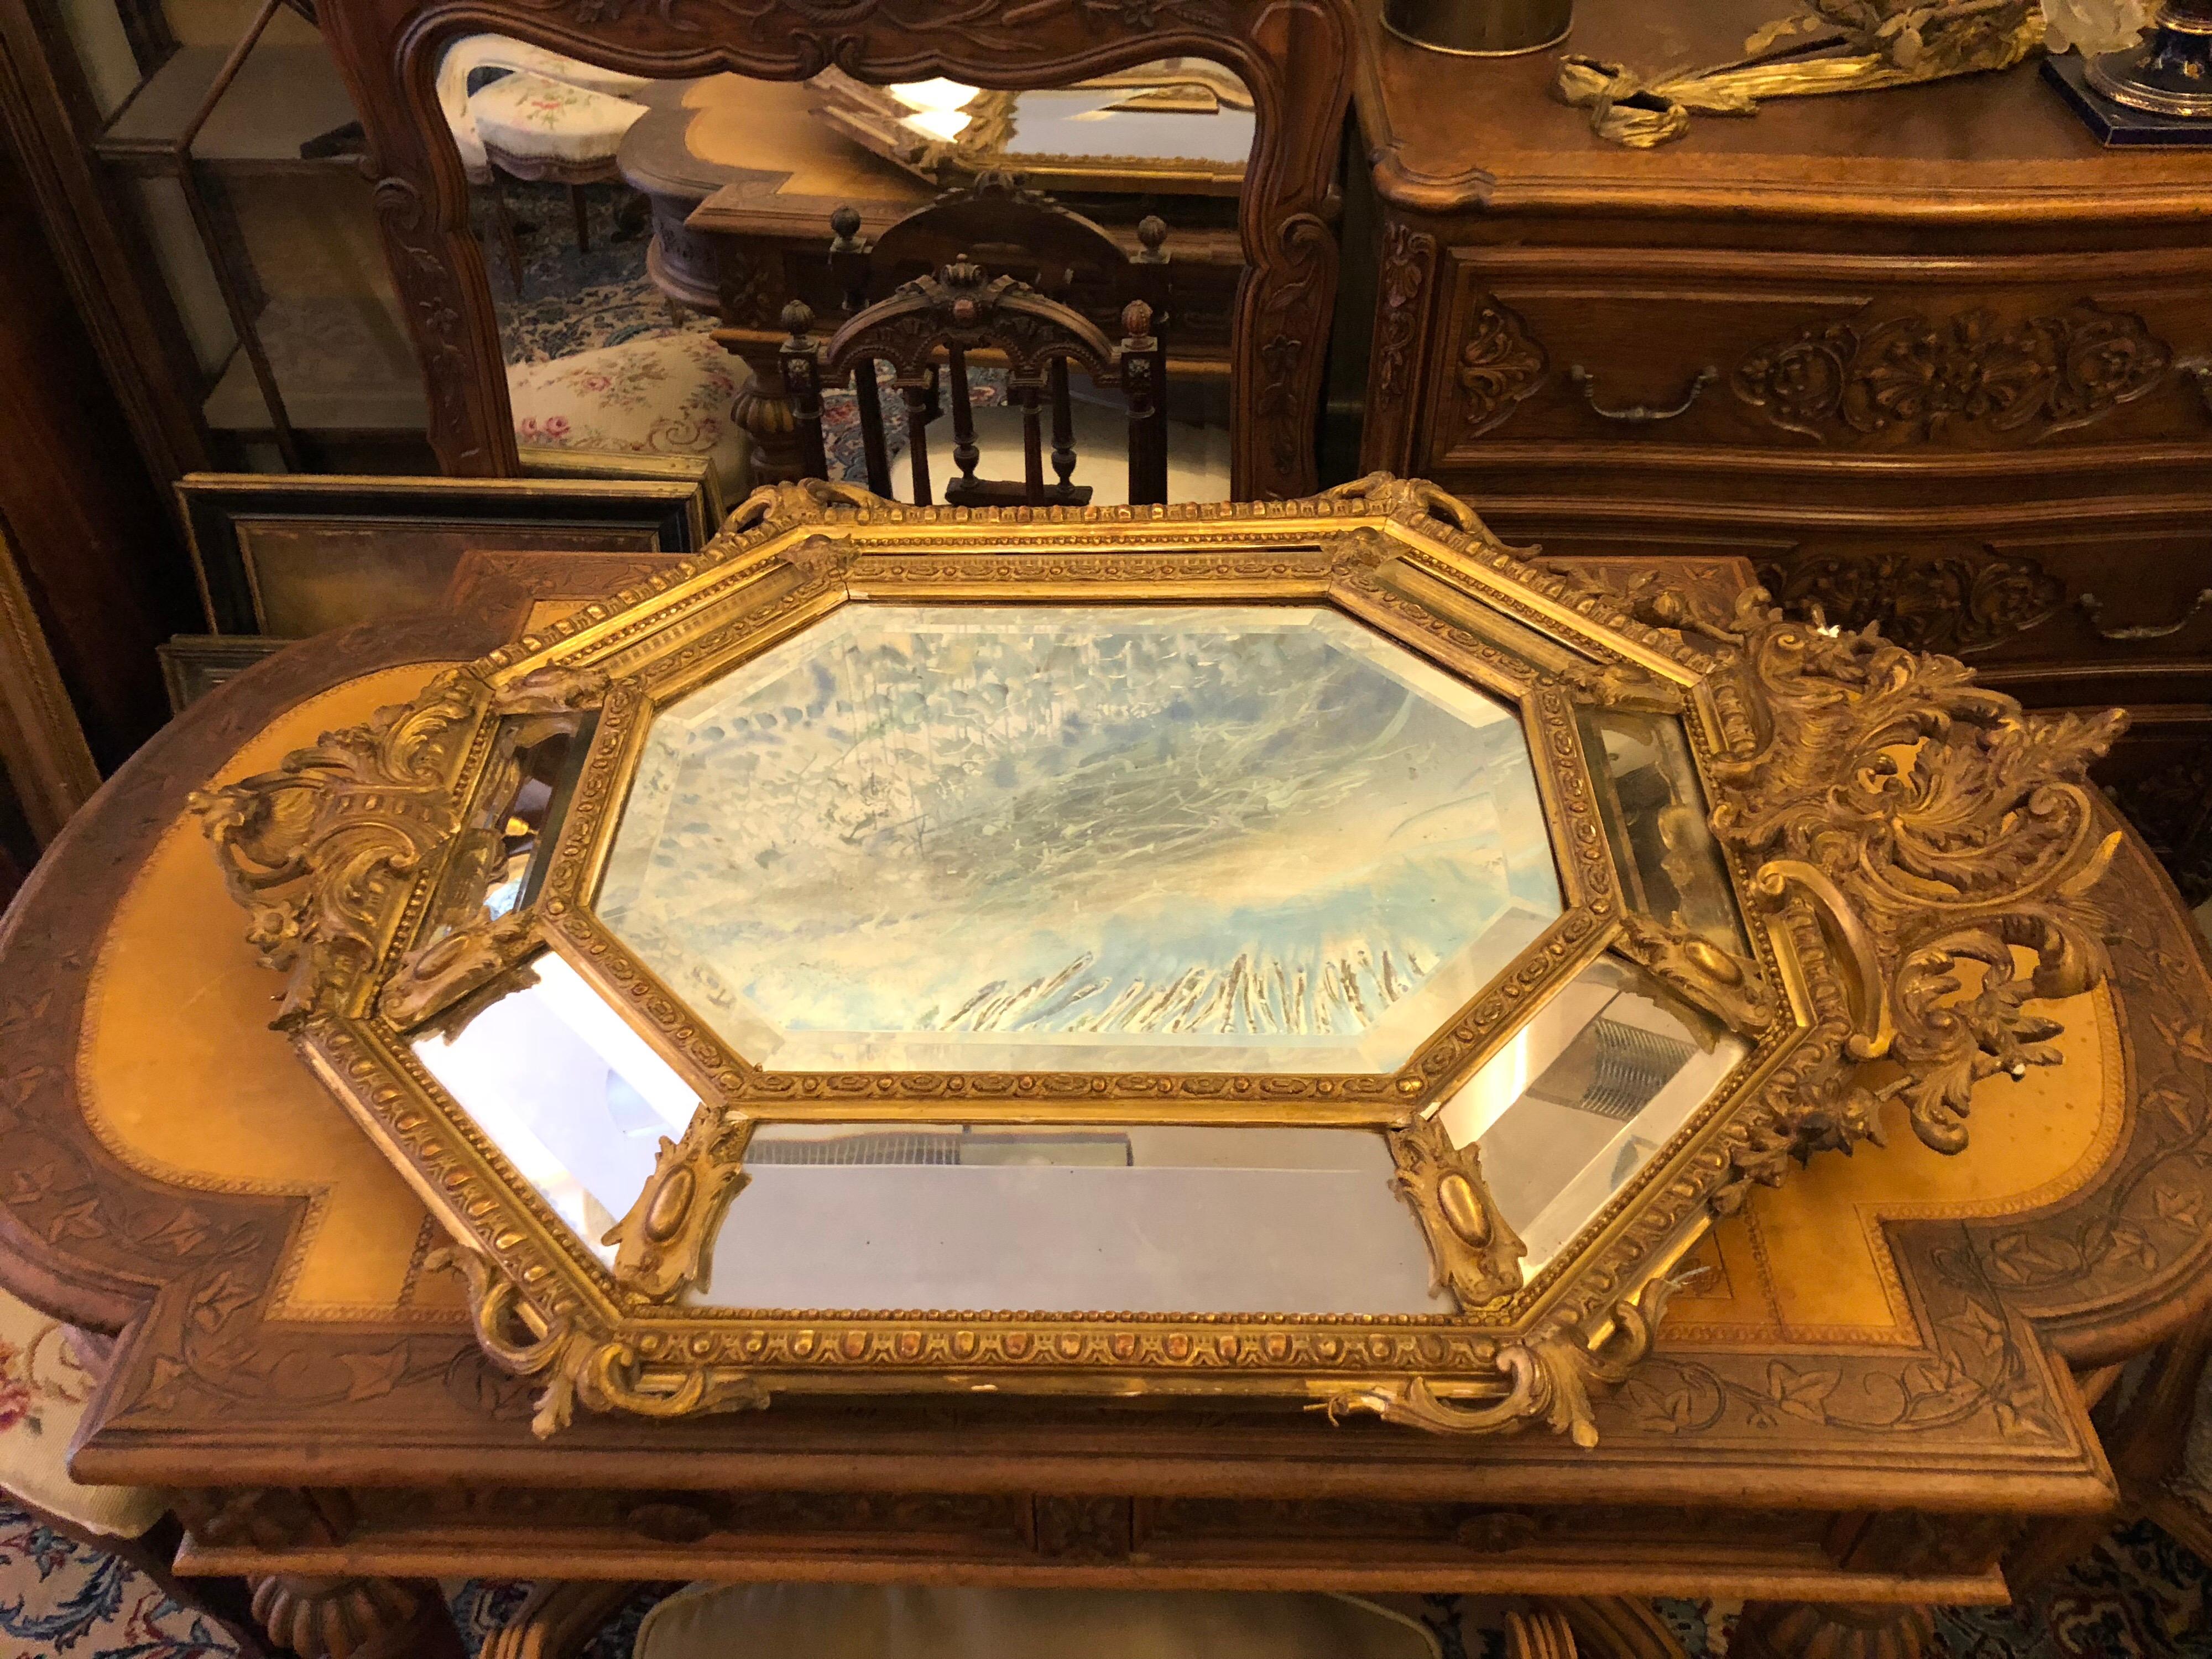 Mirror with glazing ornaments in wood and octagonal gilded stucco. The pediment with broad plume of acanthus flowers. The reserves of mirrors staples lined with gordons.
Louis XIV style - Work 19th century.
circa 1870
Dimensions: H 113 cm – L 80